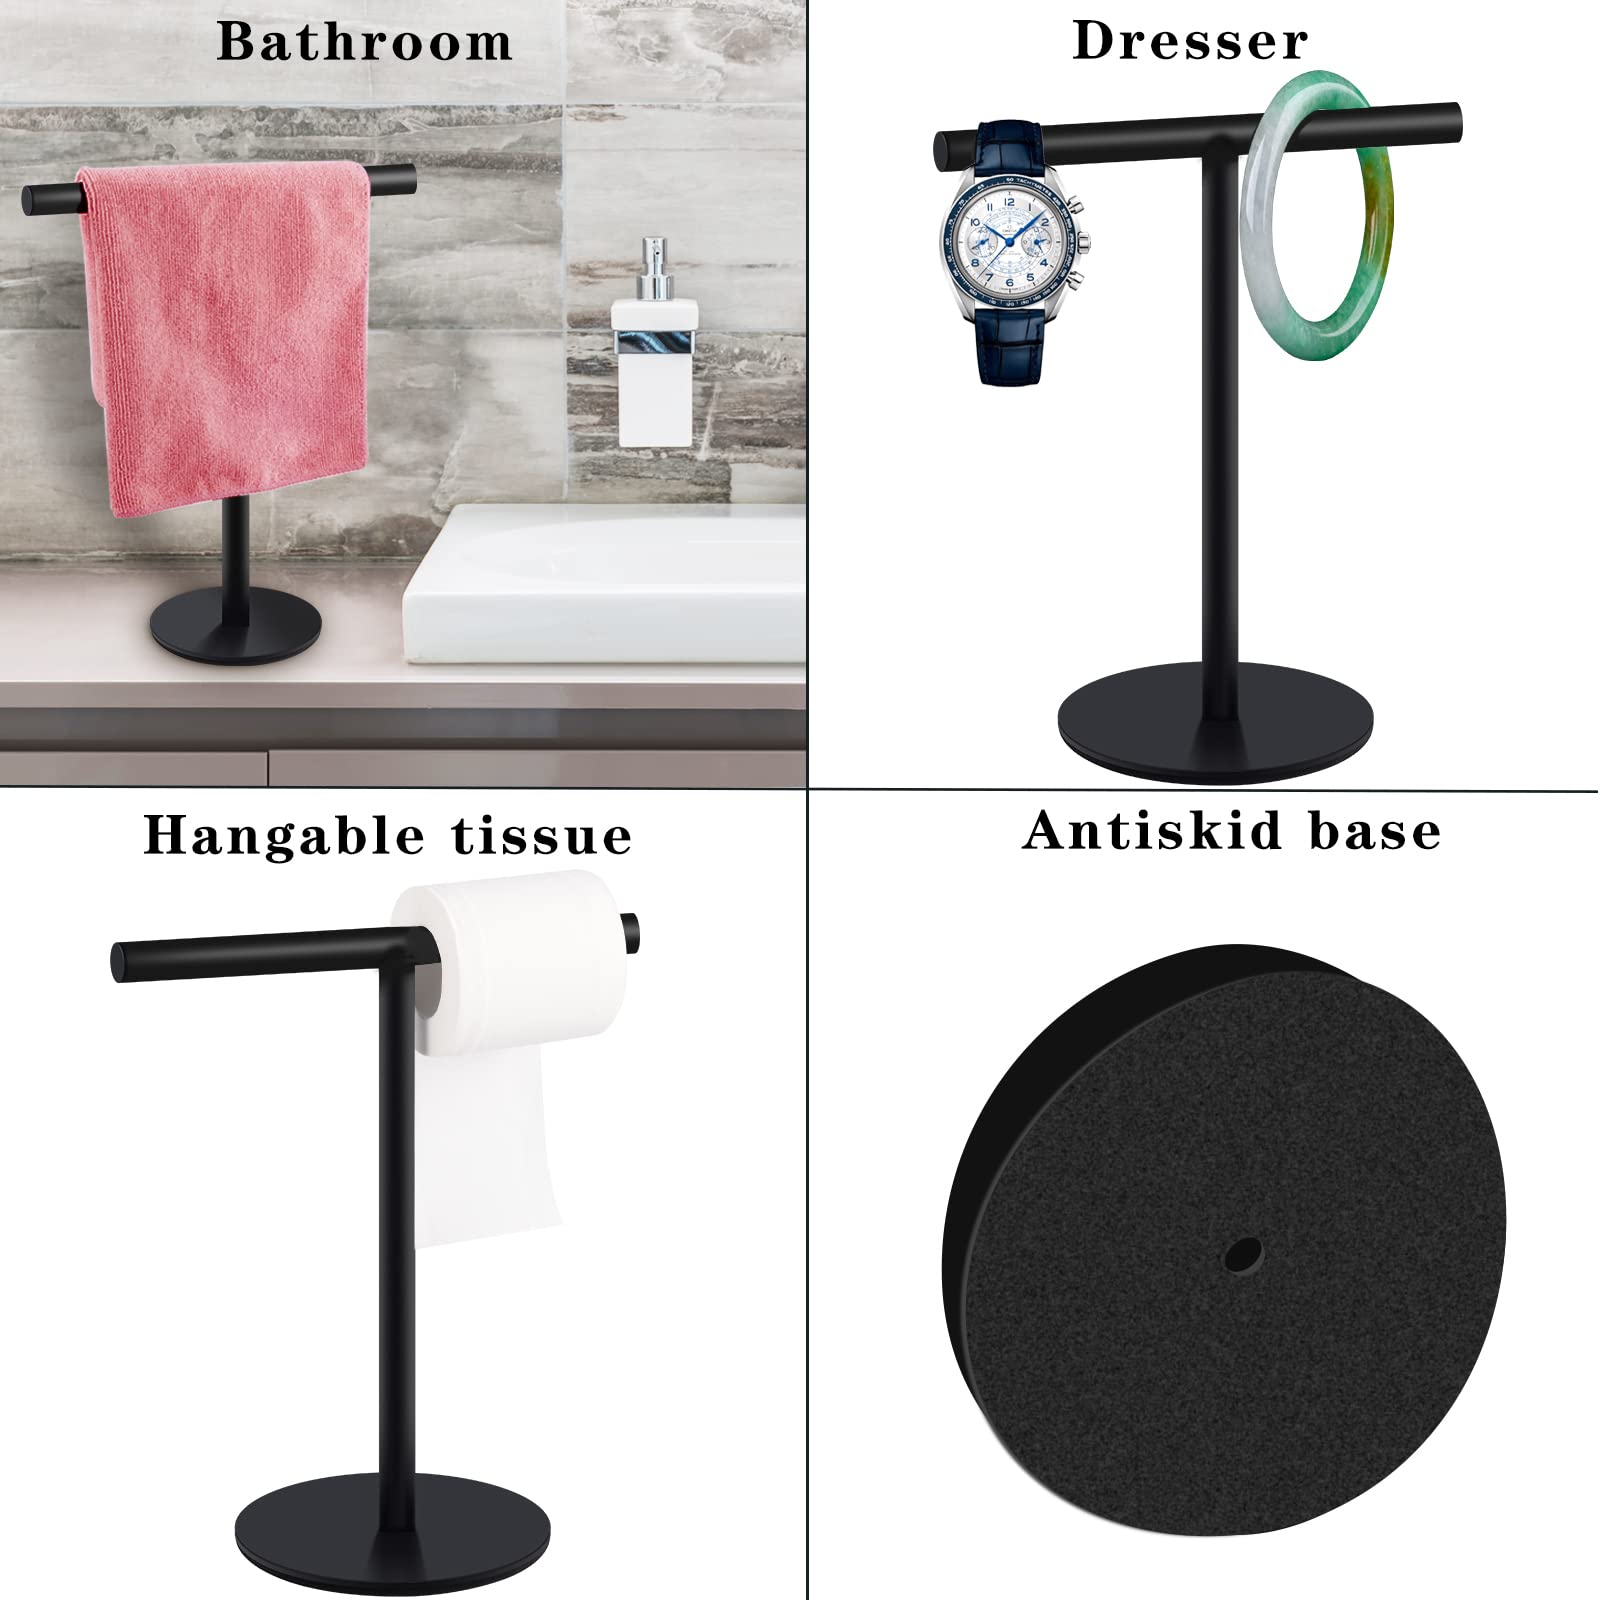 Mutclord T-Shape Hand Towel Holder - Free Standing Hand Towel Rack for Bathroom or Kitchen Countertops, with SUS304 Stainless Steel Matte Black Finish, Minimalist Style